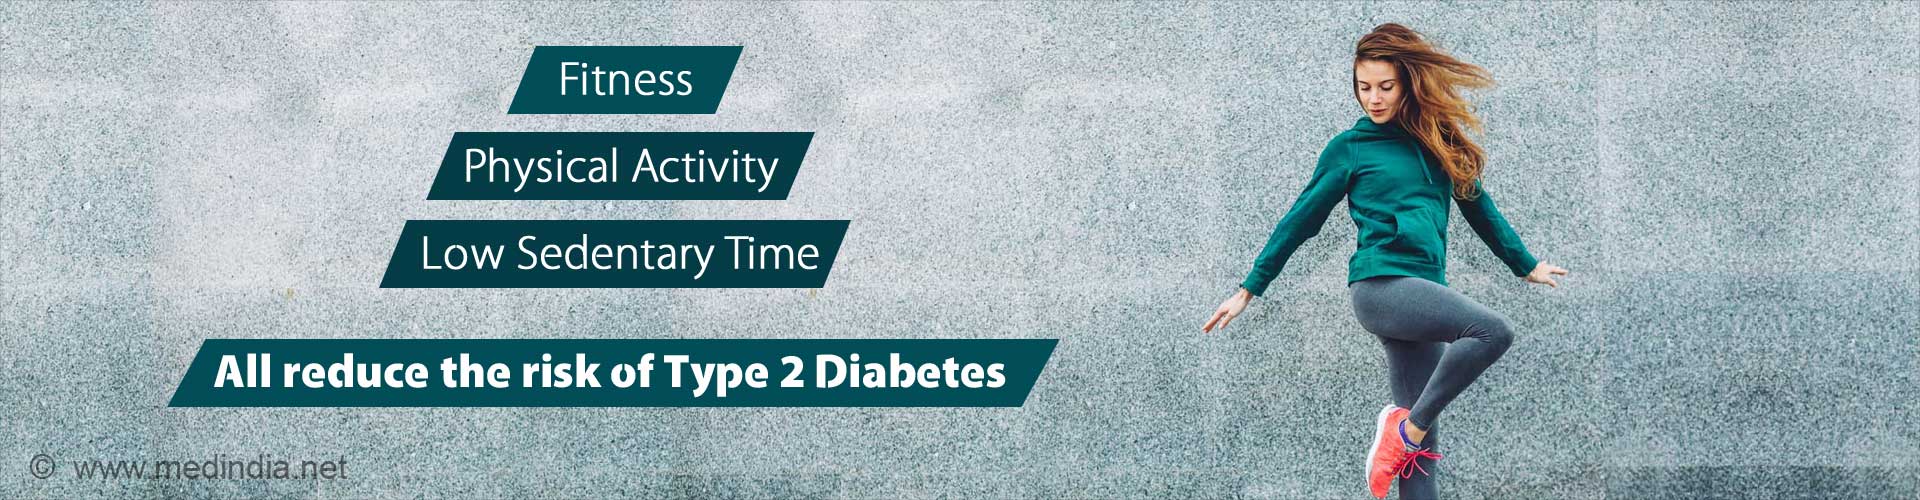 Fitness, physical activity, low sedentary time. all reduce the risk of Type 2 diabetes.